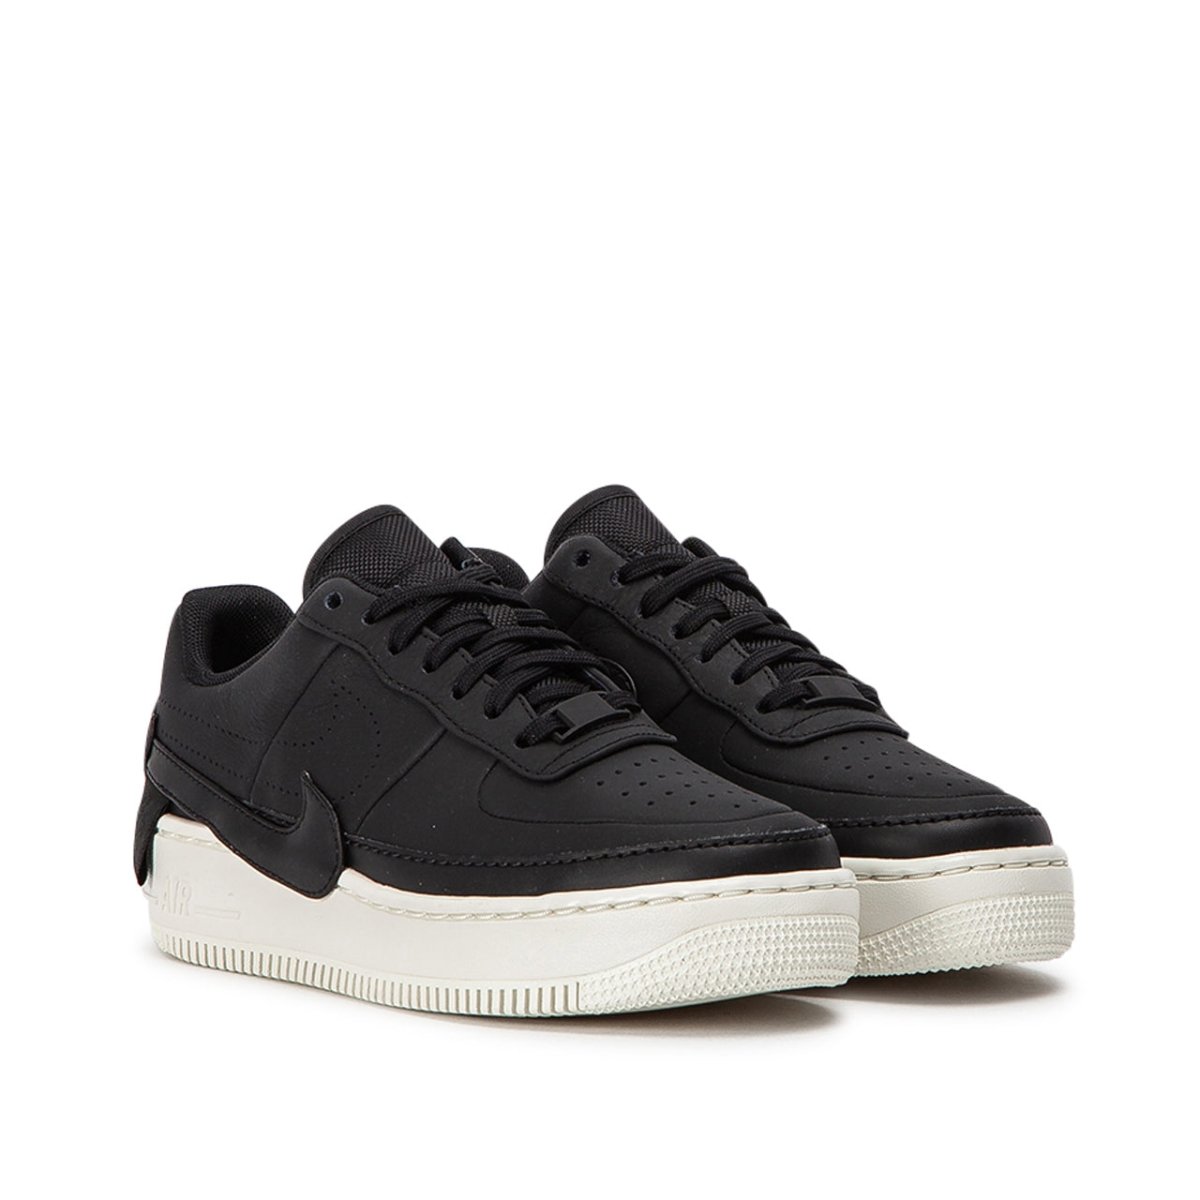 nike womens air force 1 jester xx shoes